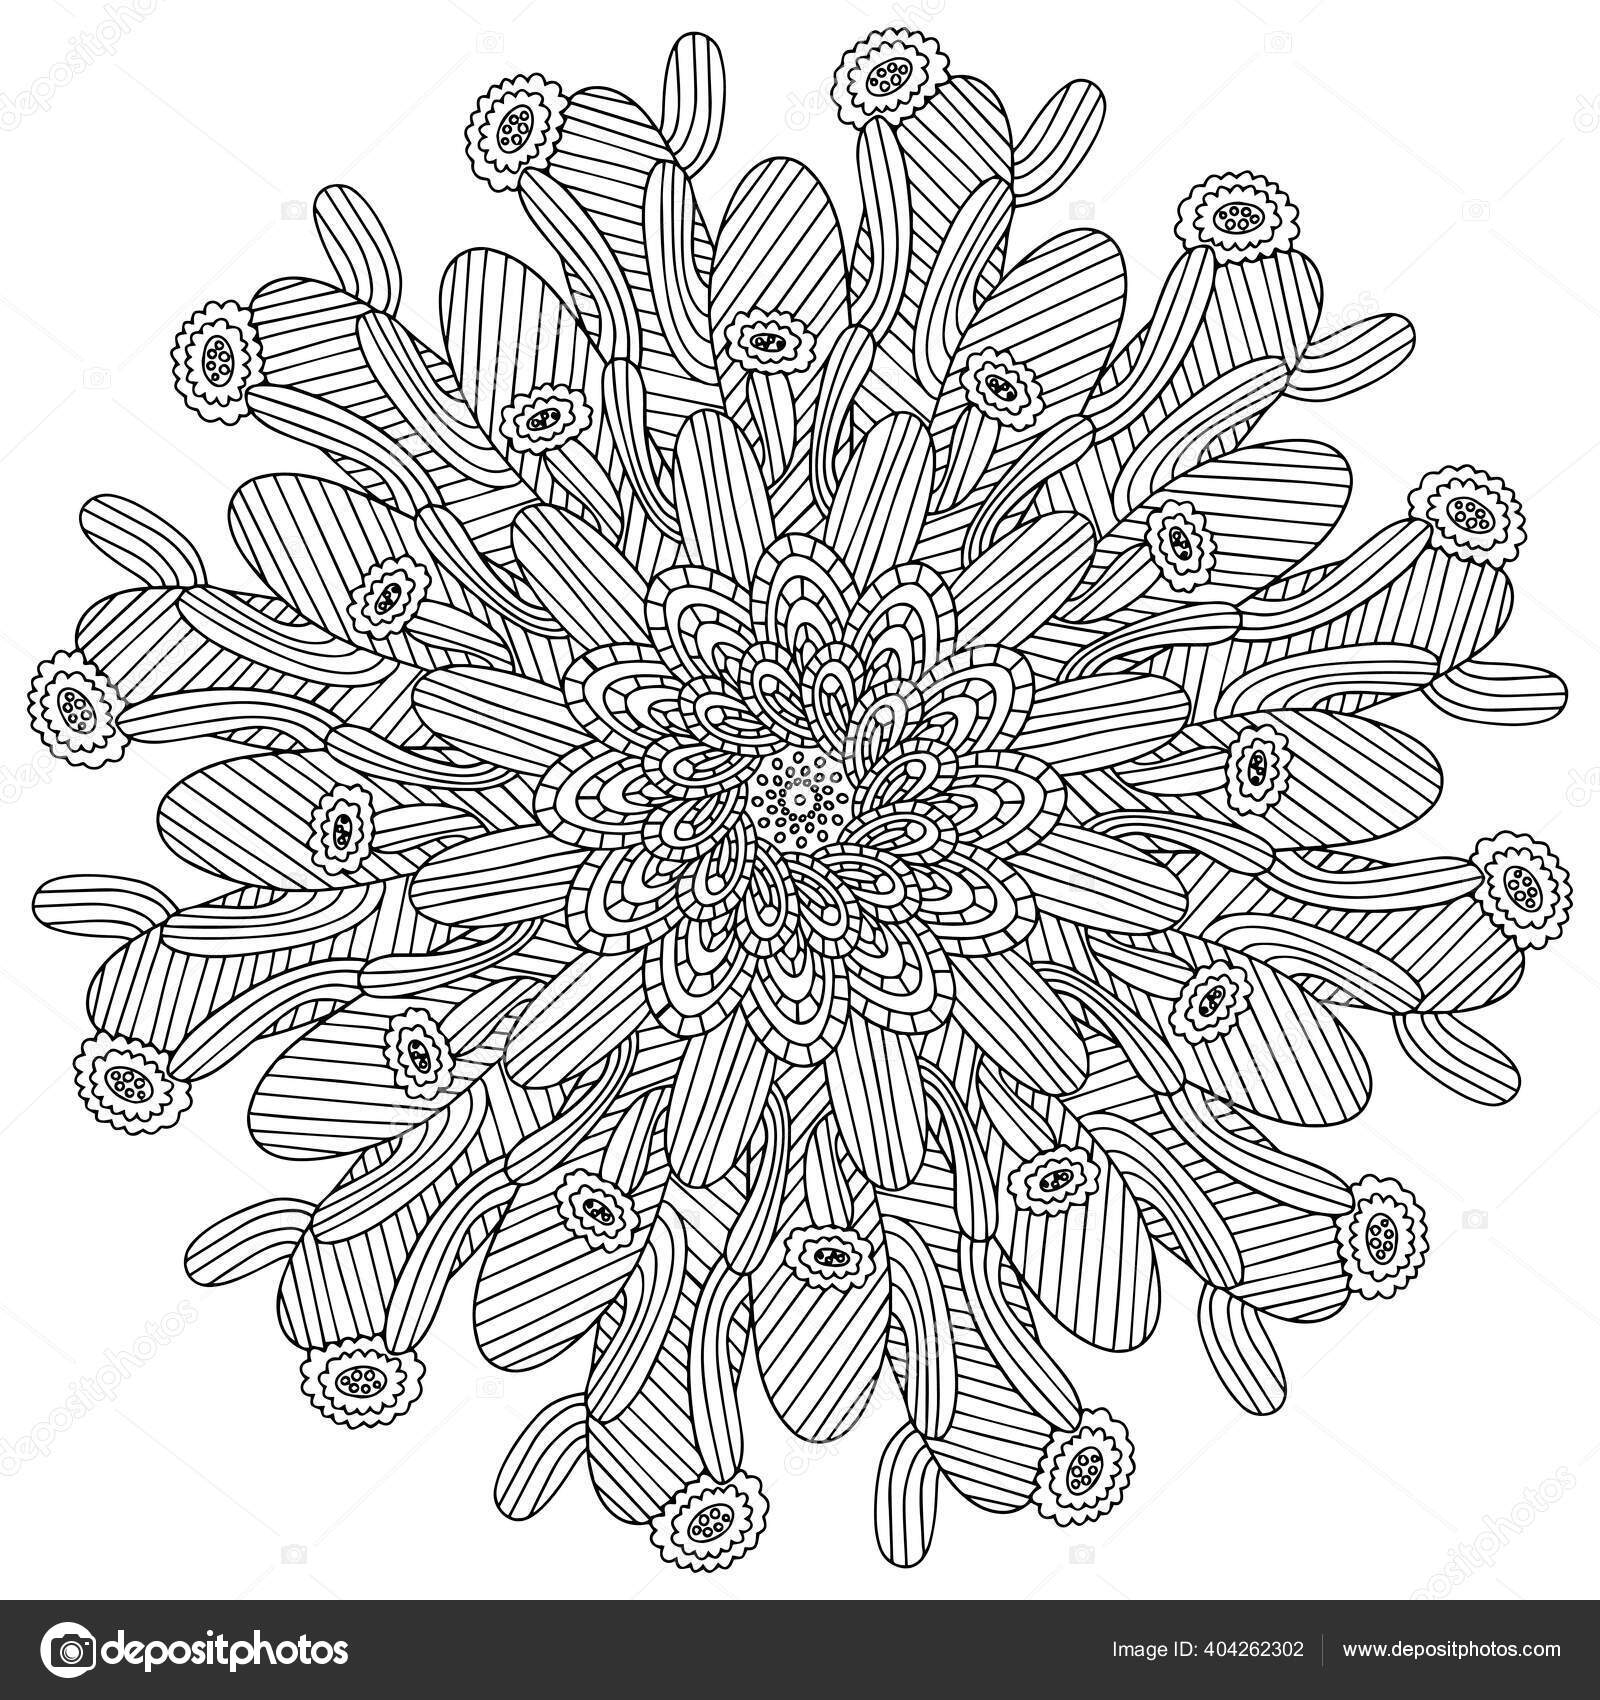 Blossom flower cactus coloring page symmetrical mandala black white cactus stock vector by funfishyandexru